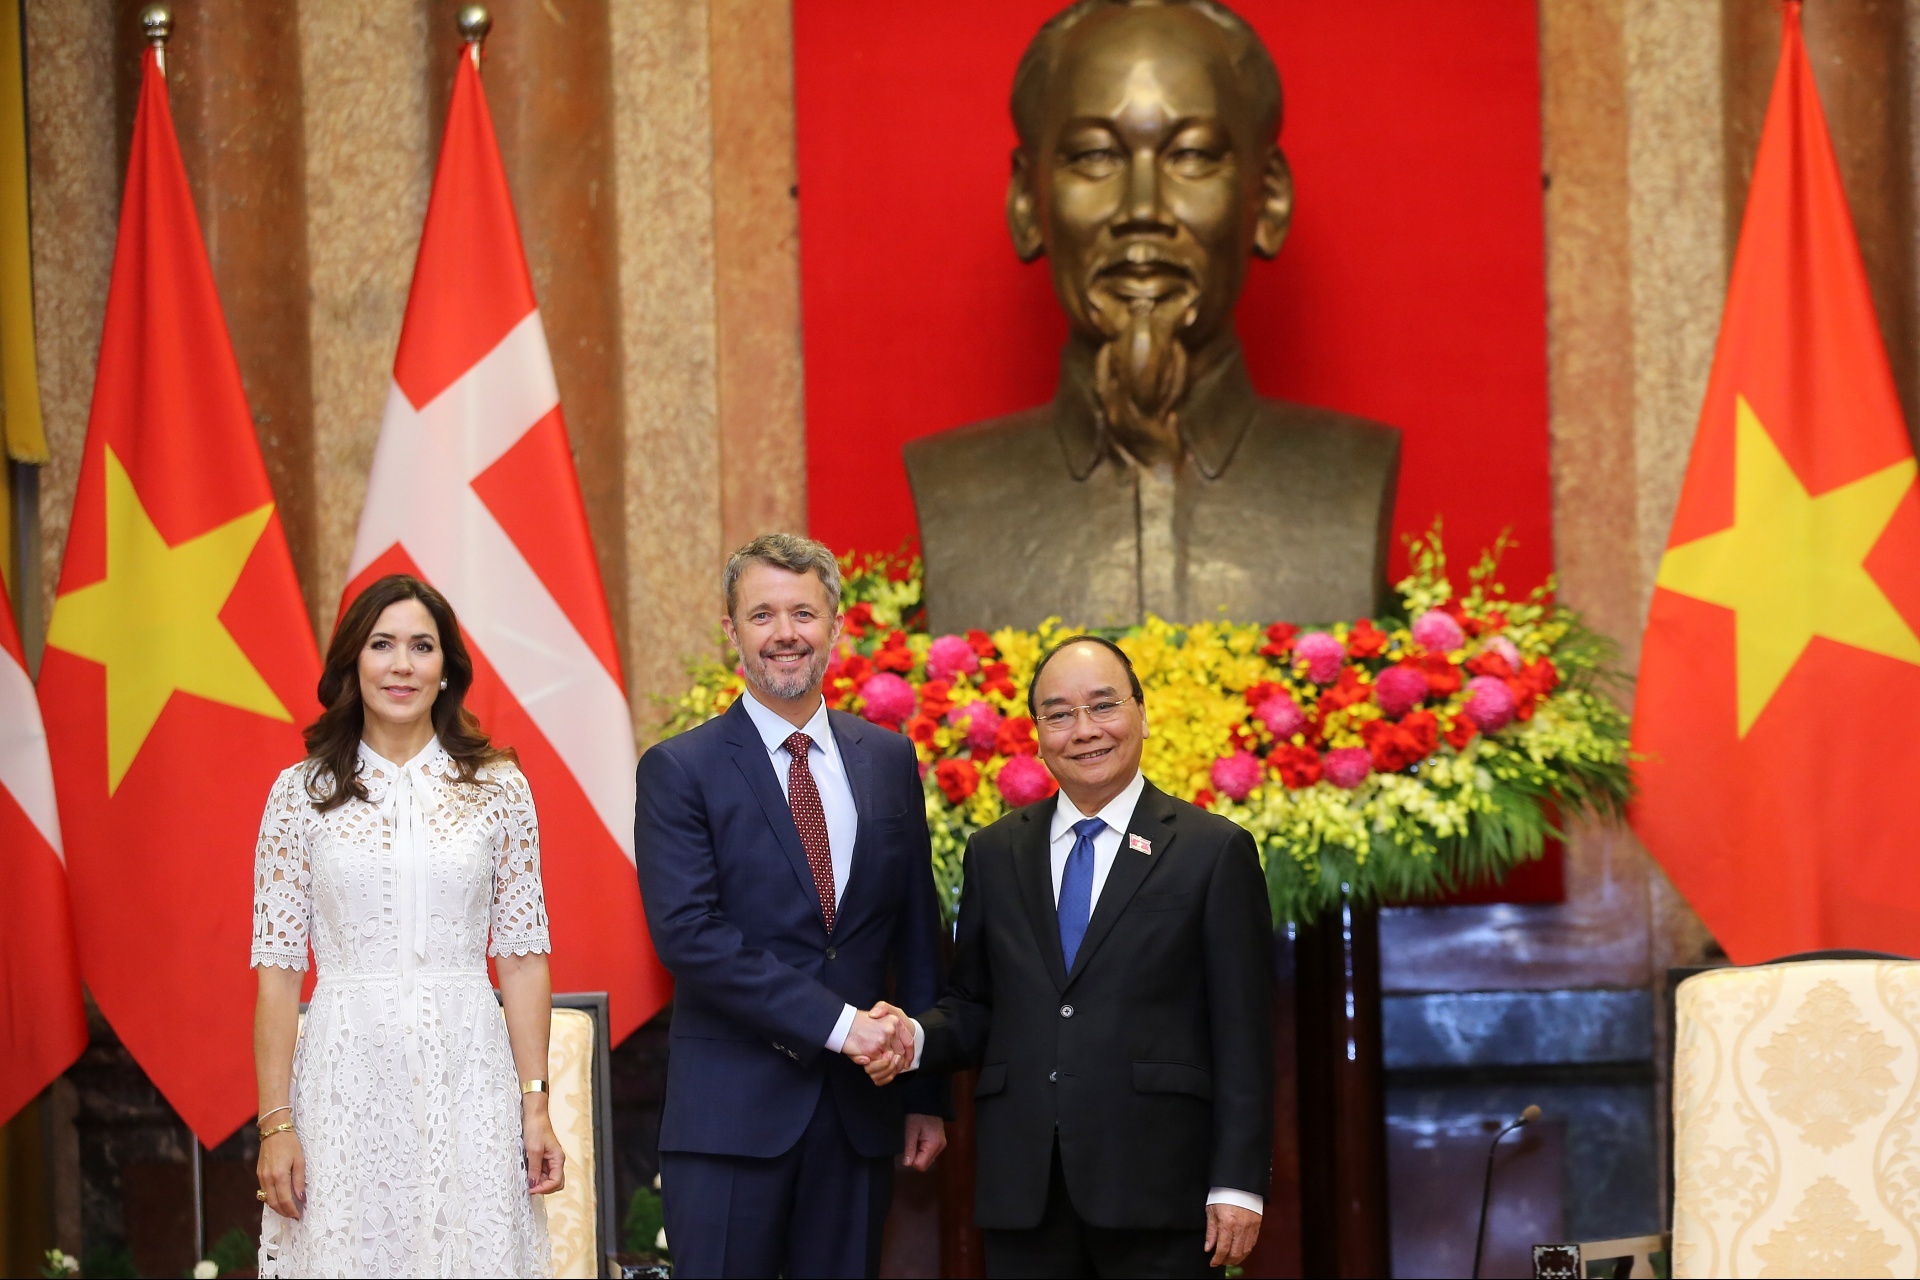 Danish royal couple leads business promotion in Vietnam